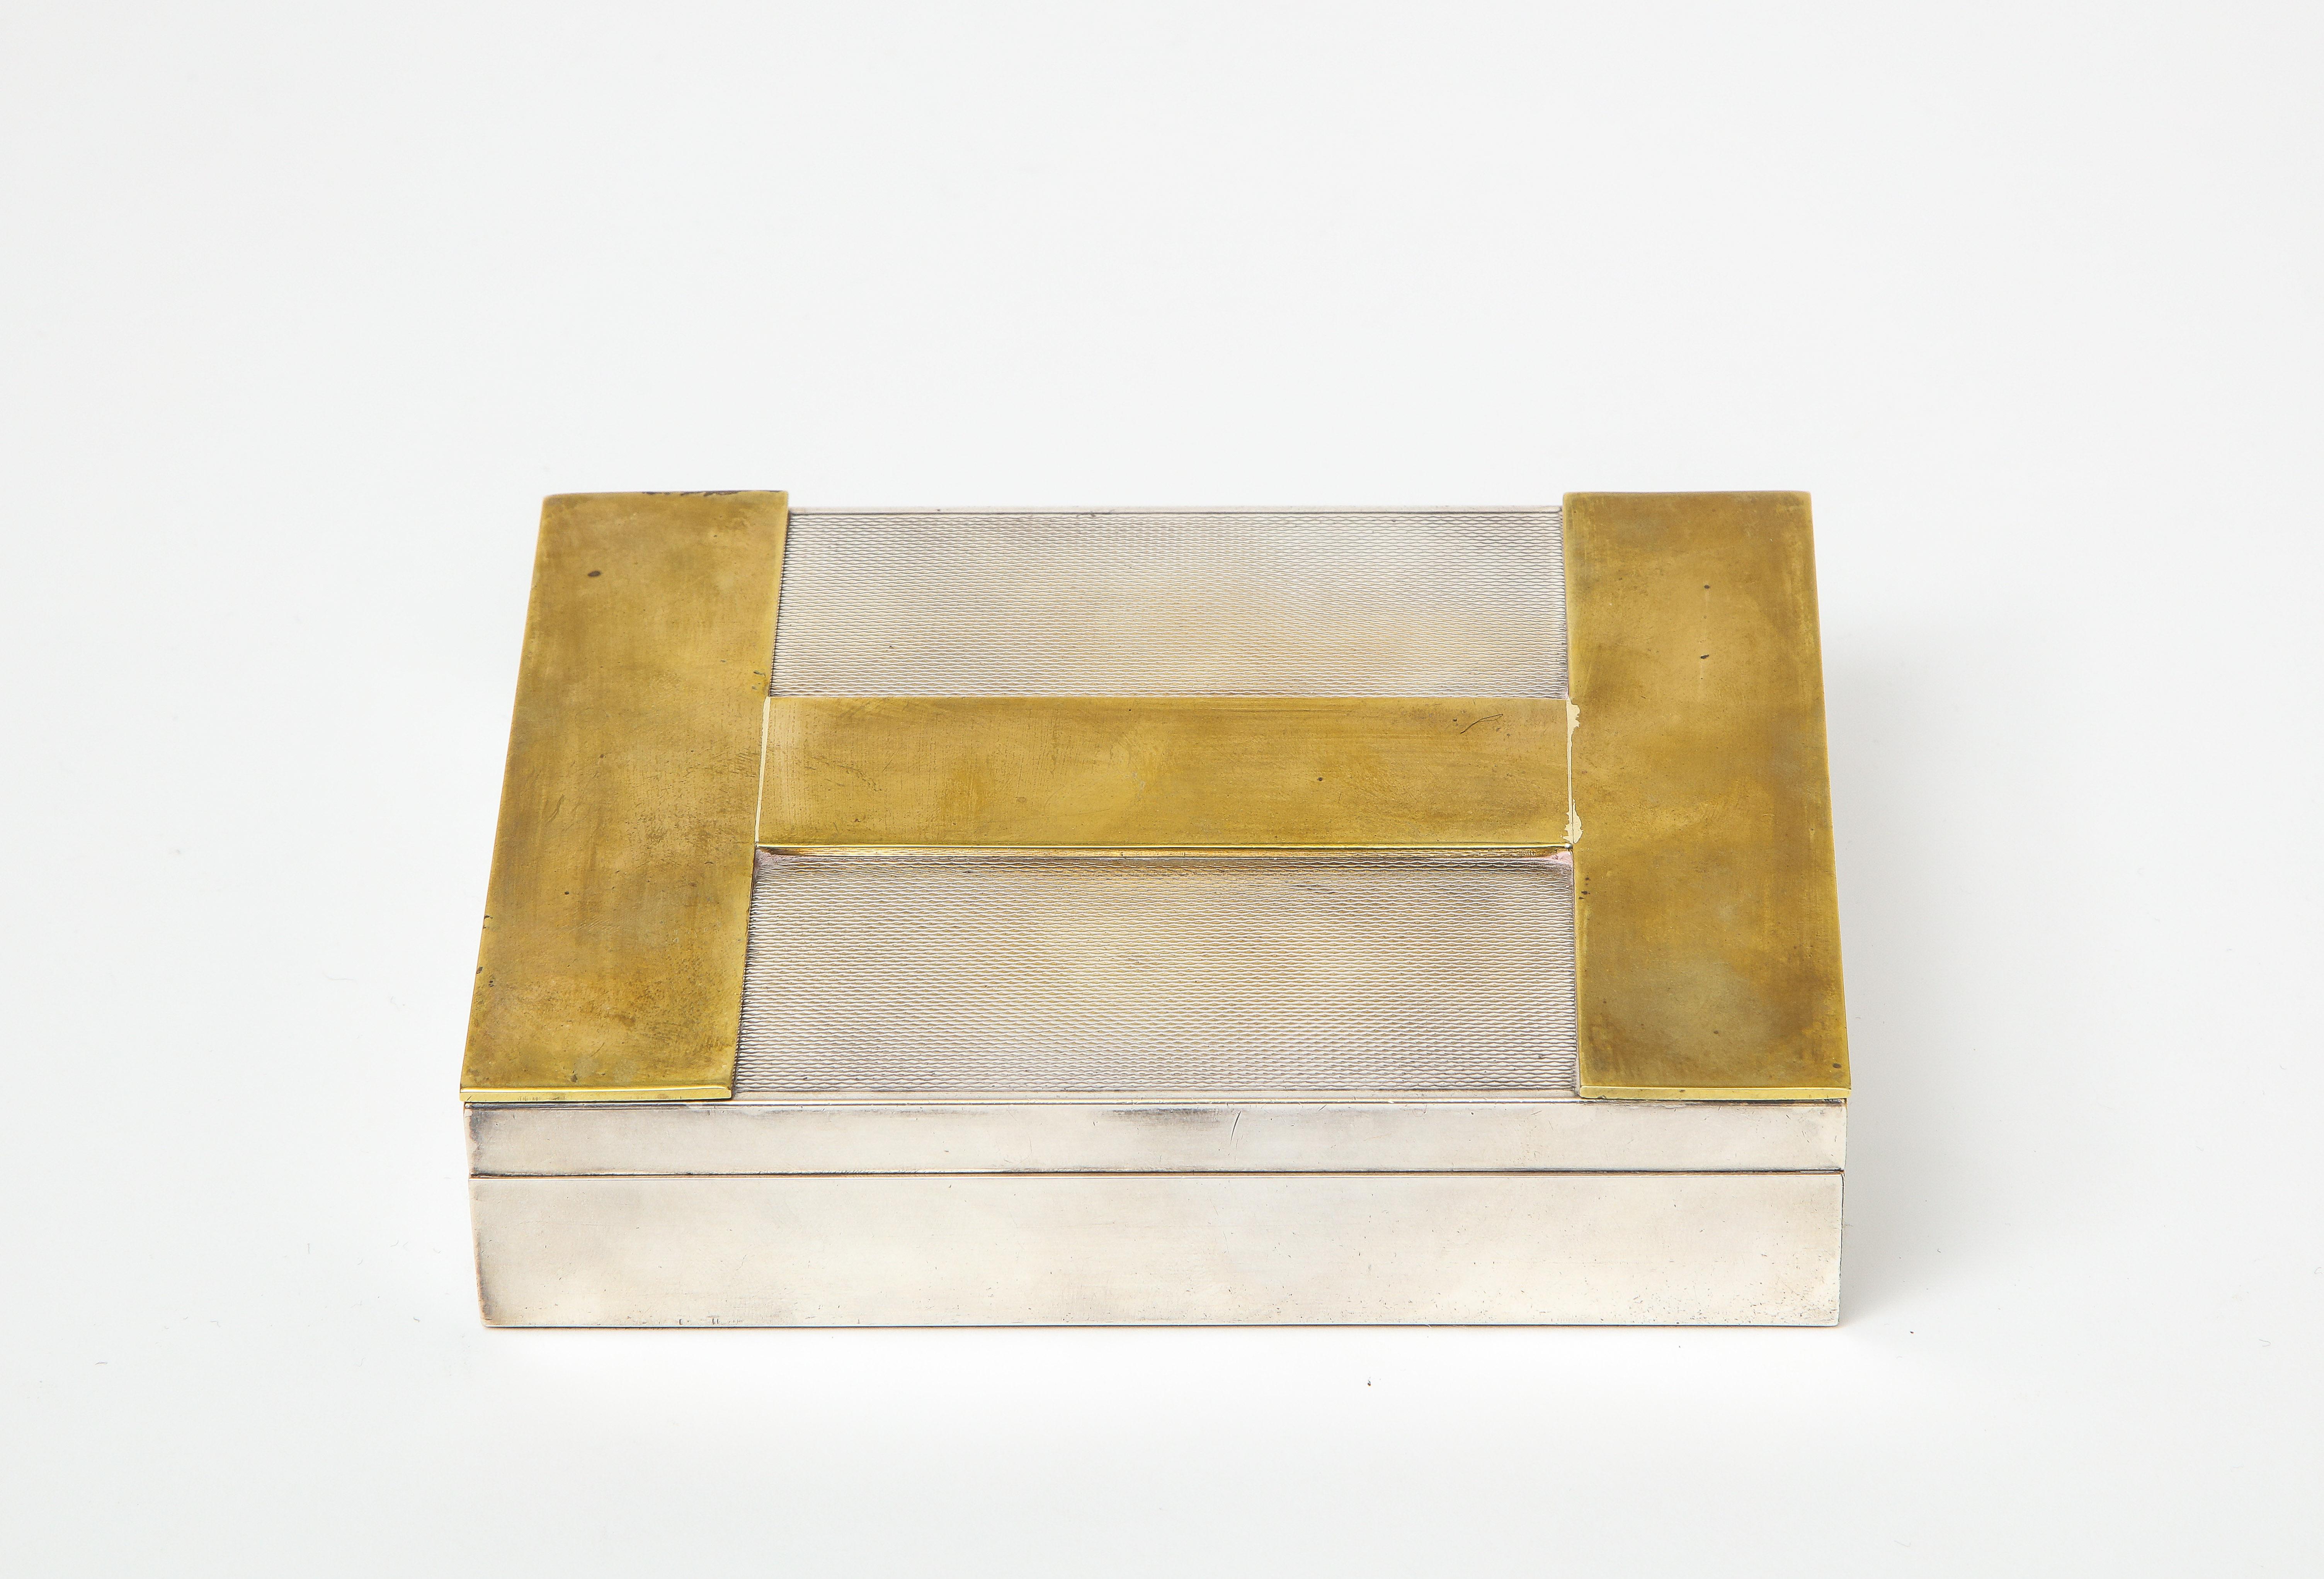 Rare vintage engine turned silver and gold-plated Hermès iconic H-box, France, circa 1960s. 

This elegant hinge-lidded decorative box features a sleek cedar wood interior organized into two compartments.  